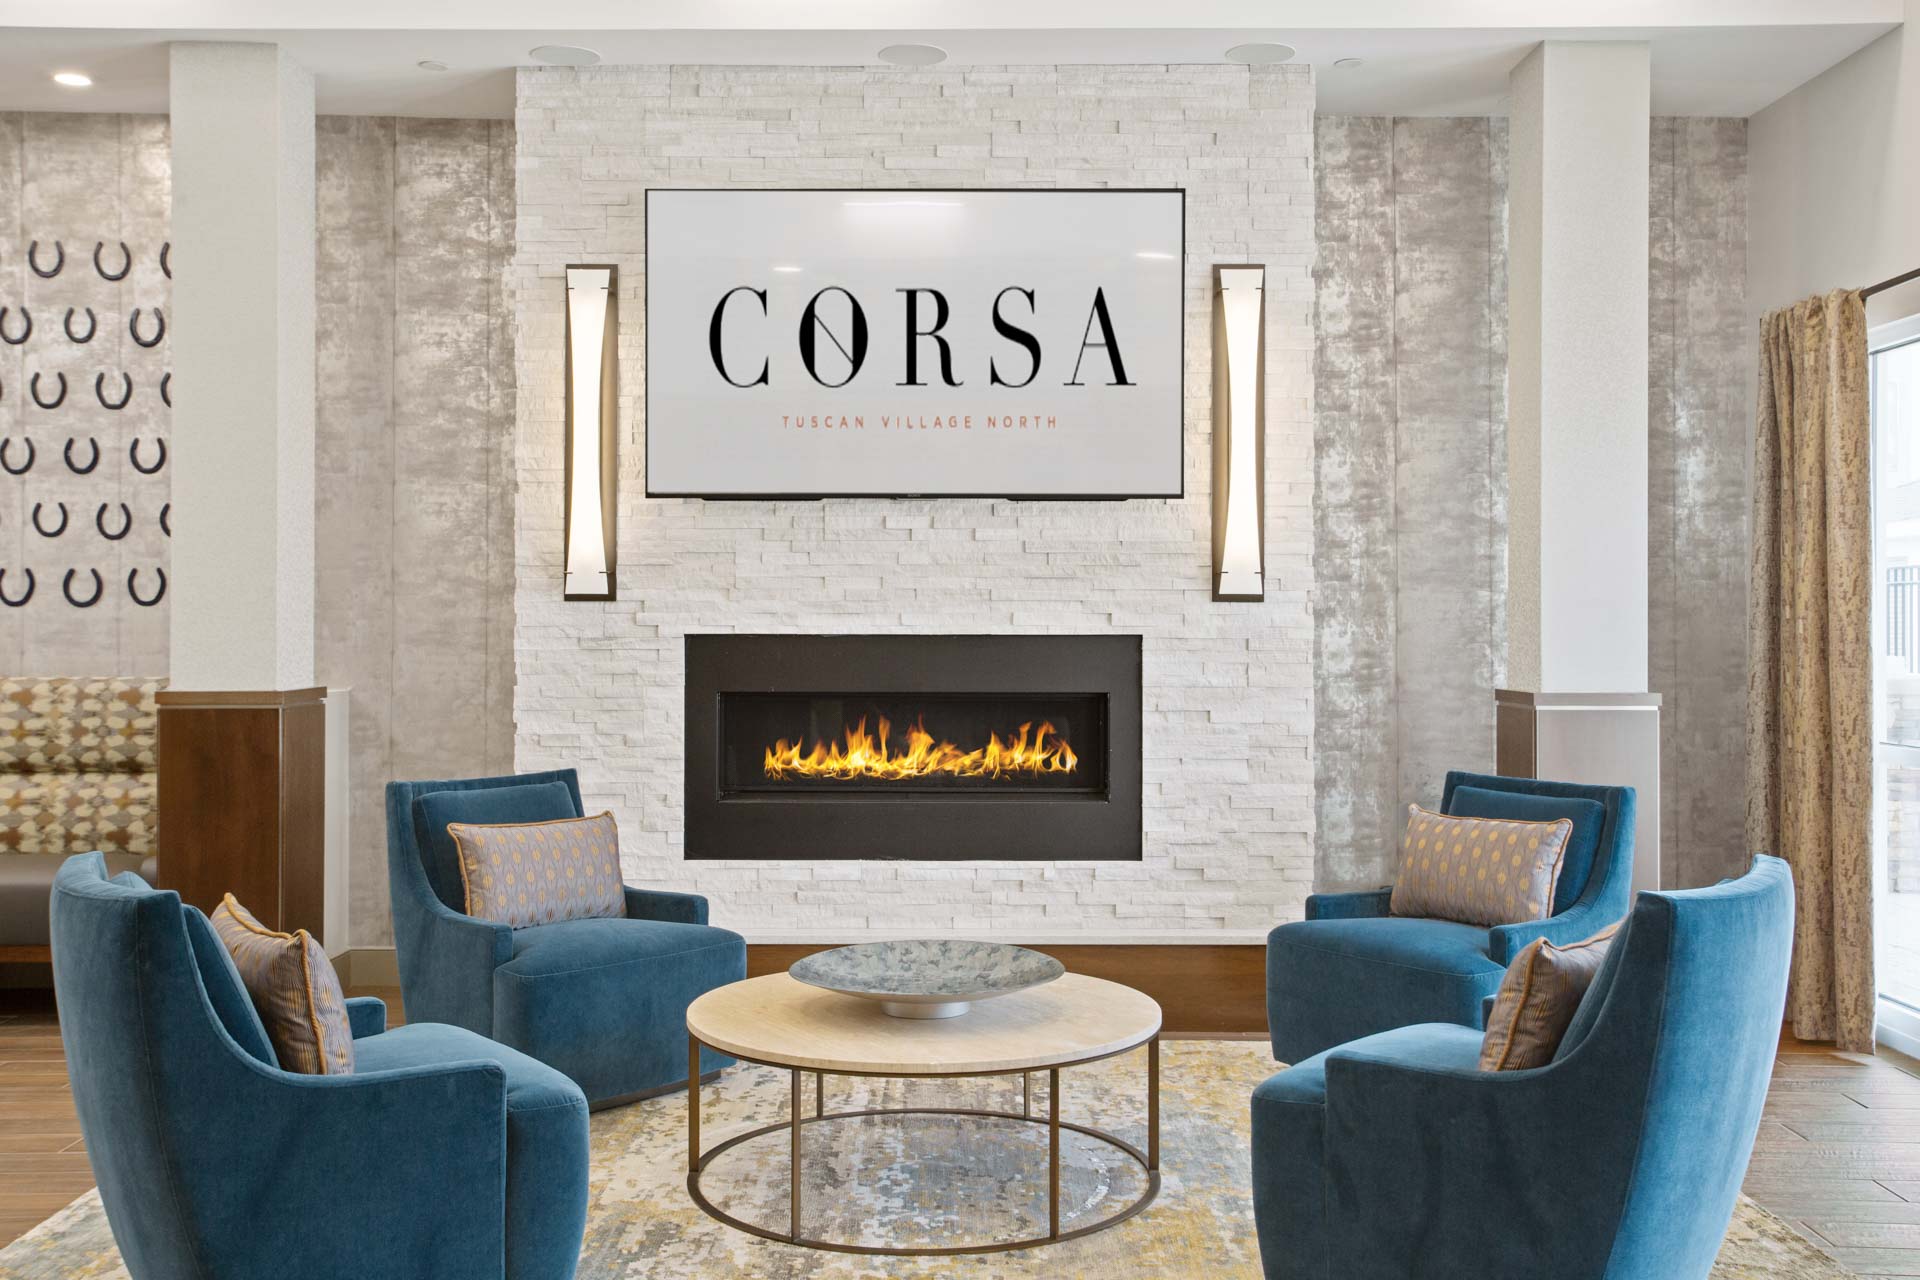 The lobby inside the Corsa Apartments in Salem, New Hampshire